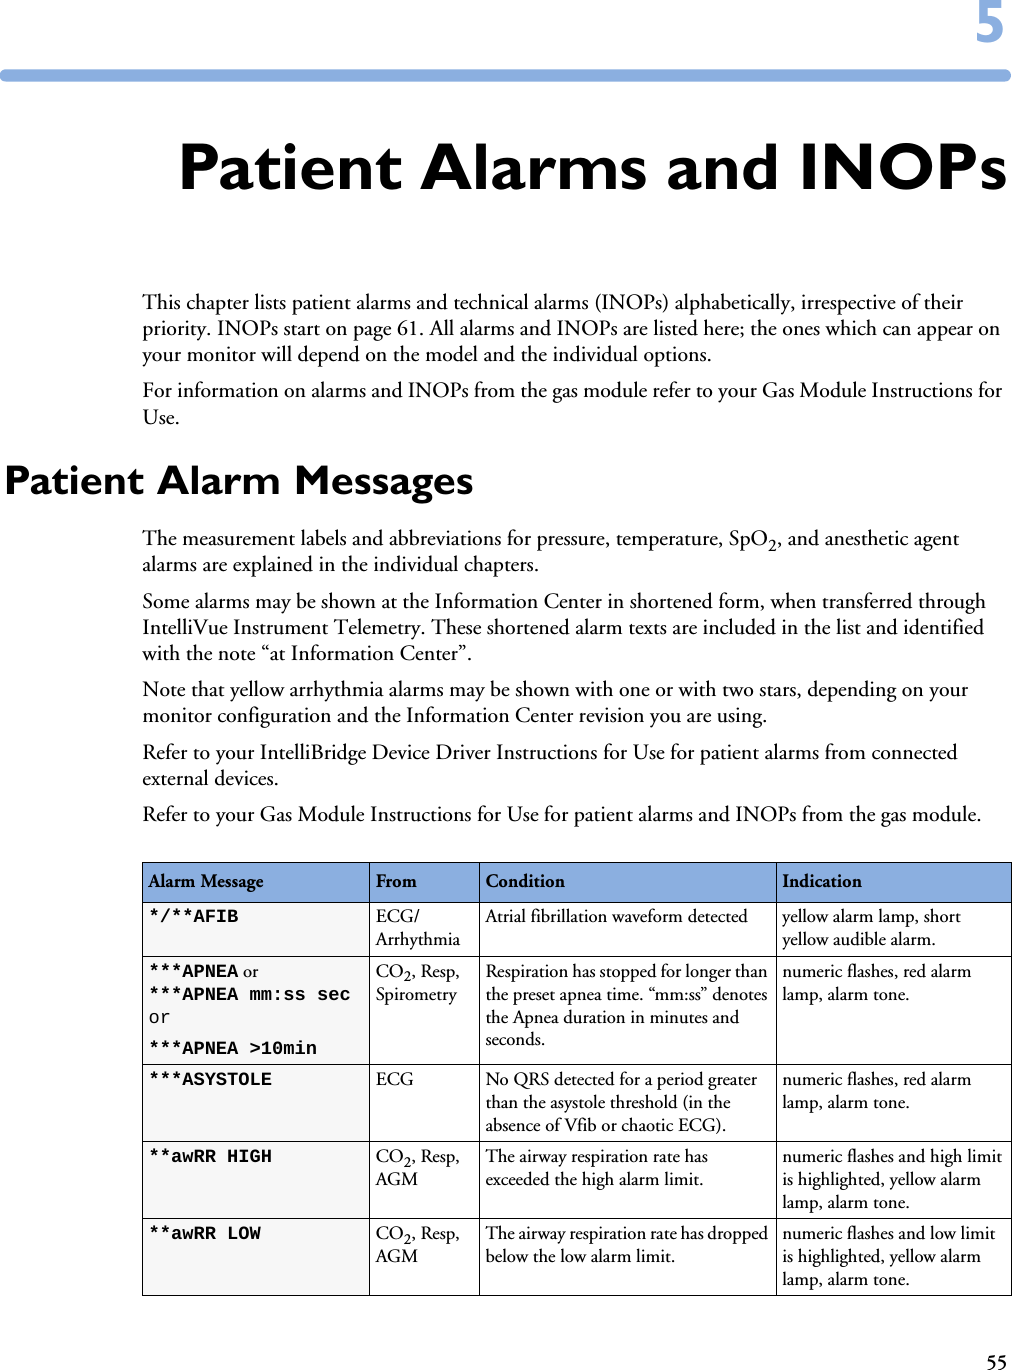 5555Patient Alarms and INOPsThis chapter lists patient alarms and technical alarms (INOPs) alphabetically, irrespective of their priority. INOPs start on page 61. All alarms and INOPs are listed here; the ones which can appear on your monitor will depend on the model and the individual options. For information on alarms and INOPs from the gas module refer to your Gas Module Instructions for Use.Patient Alarm MessagesThe measurement labels and abbreviations for pressure, temperature, SpO2, and anesthetic agent alarms are explained in the individual chapters. Some alarms may be shown at the Information Center in shortened form, when transferred through IntelliVue Instrument Telemetry. These shortened alarm texts are included in the list and identified with the note “at Information Center”.Note that yellow arrhythmia alarms may be shown with one or with two stars, depending on your monitor configuration and the Information Center revision you are using.Refer to your IntelliBridge Device Driver Instructions for Use for patient alarms from connected external devices. Refer to your Gas Module Instructions for Use for patient alarms and INOPs from the gas module.Alarm Message From Condition Indication*/**AFIB ECG/ArrhythmiaAtrial fibrillation waveform detected yellow alarm lamp, short yellow audible alarm.***APNEA or***APNEA mm:ss sec or***APNEA &gt;10minCO2, Resp, SpirometryRespiration has stopped for longer than the preset apnea time. “mm:ss” denotes the Apnea duration in minutes and seconds. numeric flashes, red alarm lamp, alarm tone. ***ASYSTOLE ECG No QRS detected for a period greater than the asystole threshold (in the absence of Vfib or chaotic ECG).numeric flashes, red alarm lamp, alarm tone.**awRR HIGH CO2, Resp, AGMThe airway respiration rate has exceeded the high alarm limit.numeric flashes and high limit is highlighted, yellow alarm lamp, alarm tone.**awRR LOW CO2, Resp, AGMThe airway respiration rate has dropped below the low alarm limit.numeric flashes and low limit is highlighted, yellow alarm lamp, alarm tone.